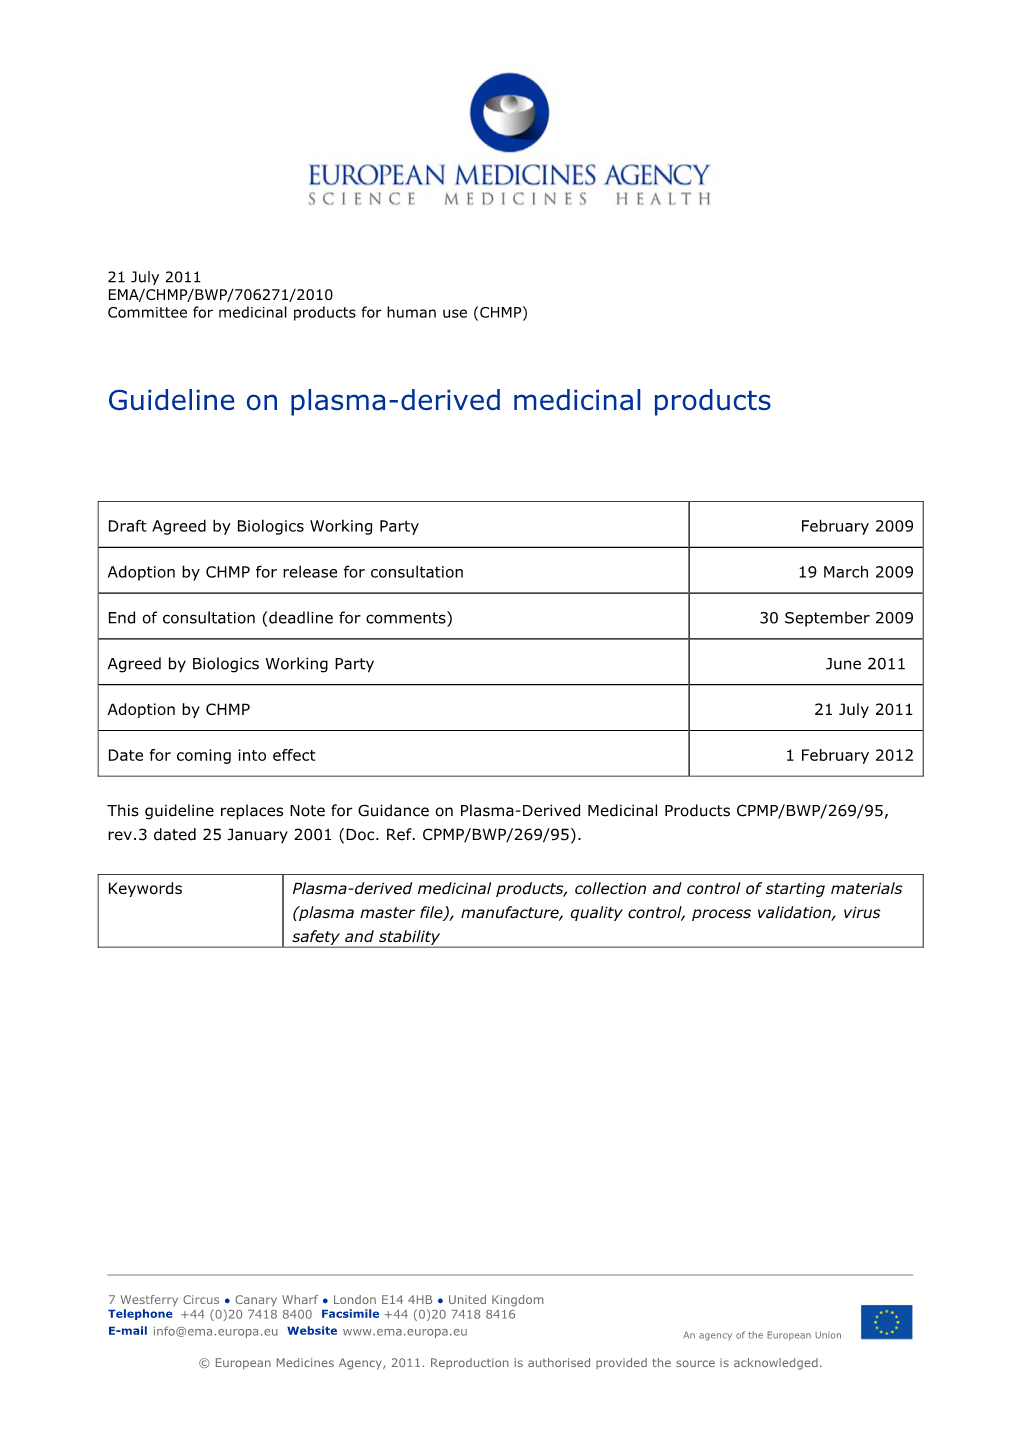 Guideline on Plasma-Derived Medicinal Products